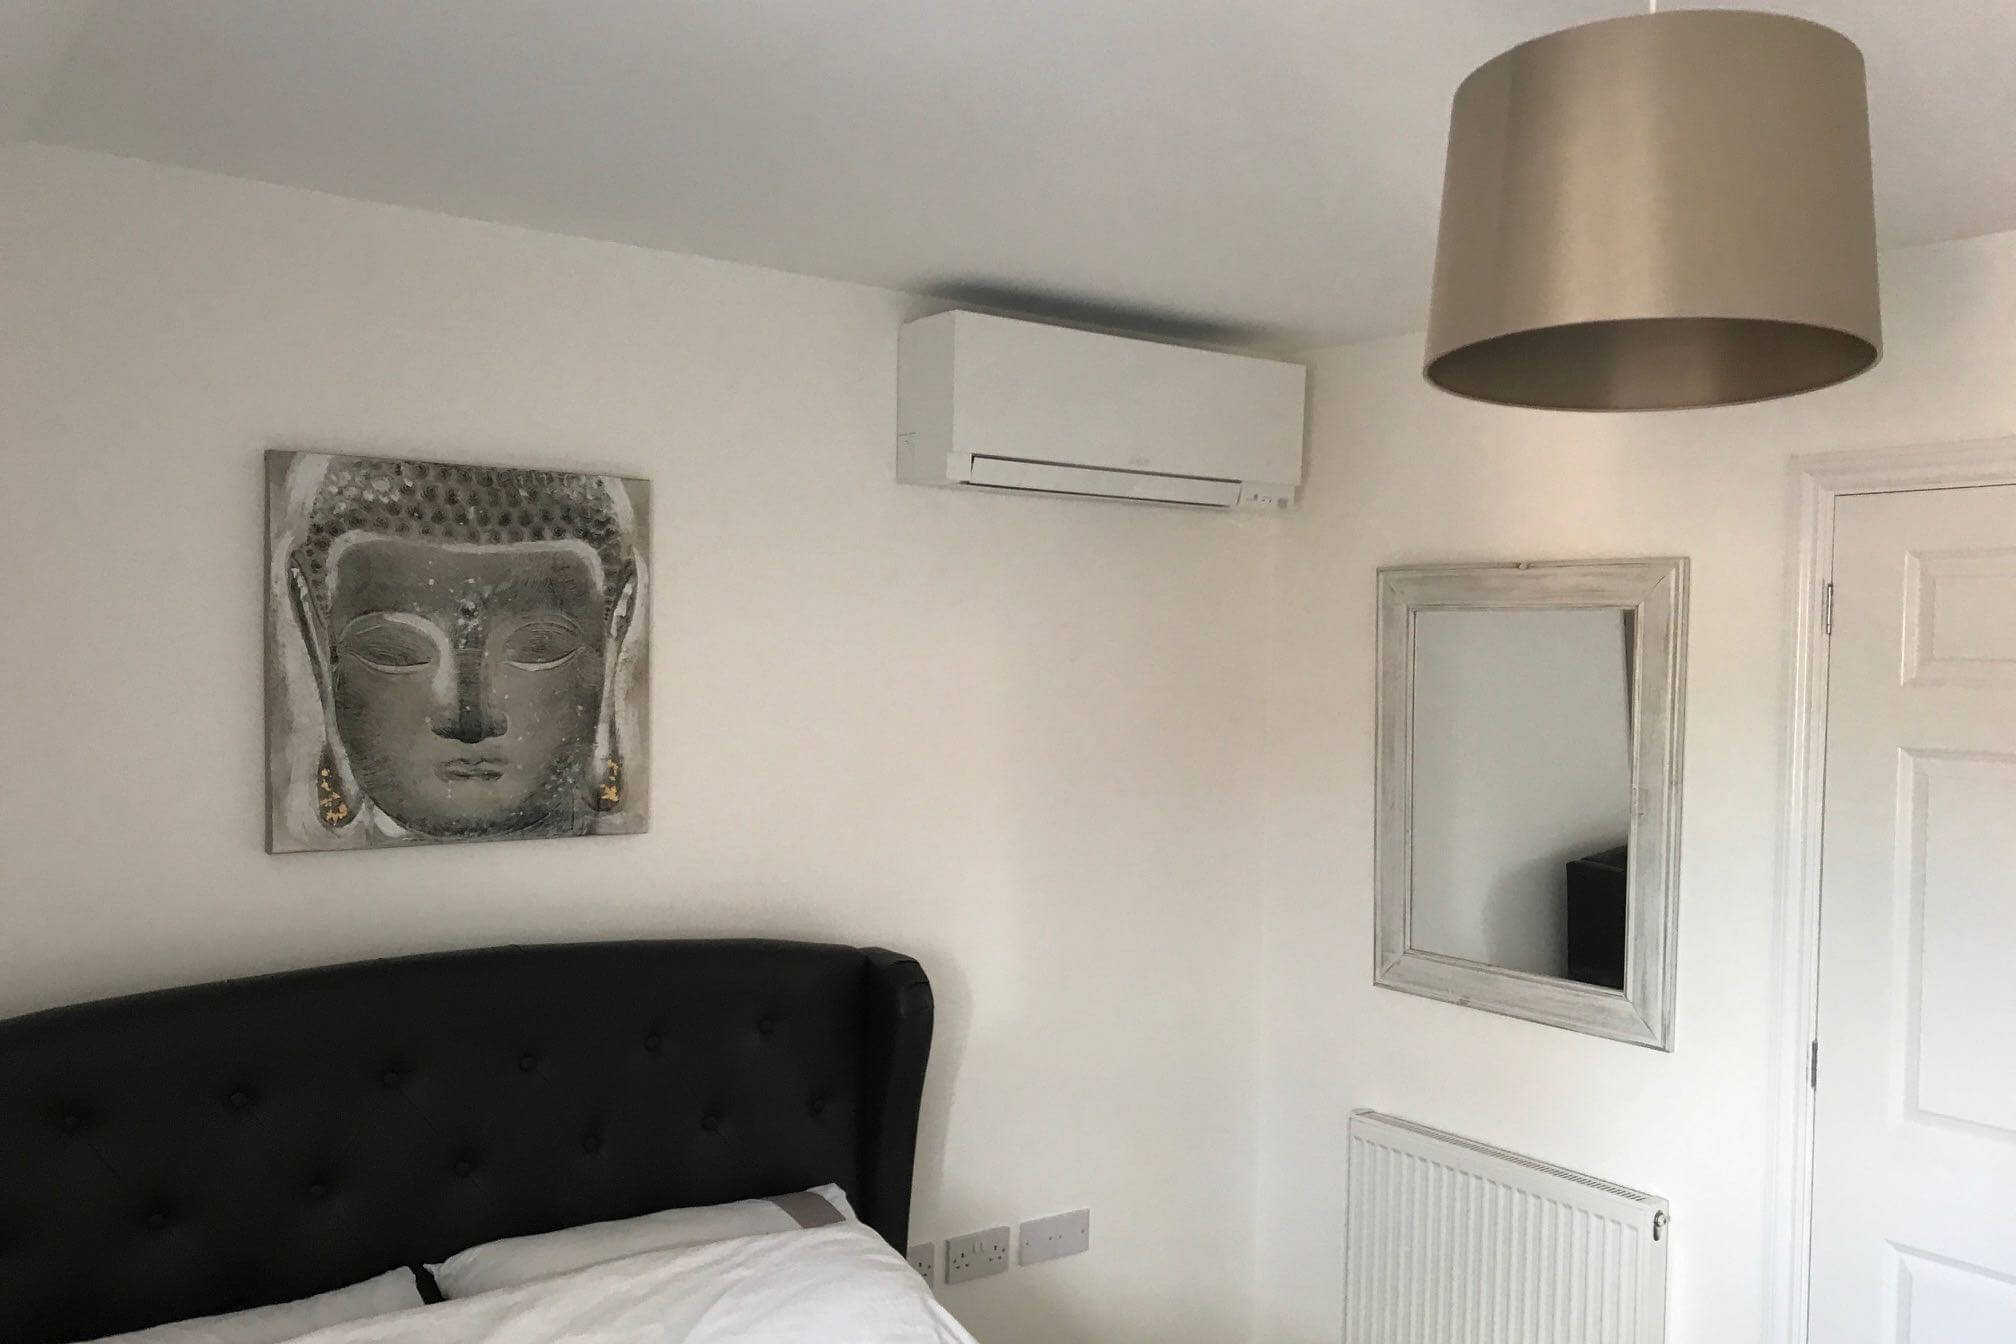 White mall counted mitsubishi domestic air conditioning unit in white and silver bedroom above bed